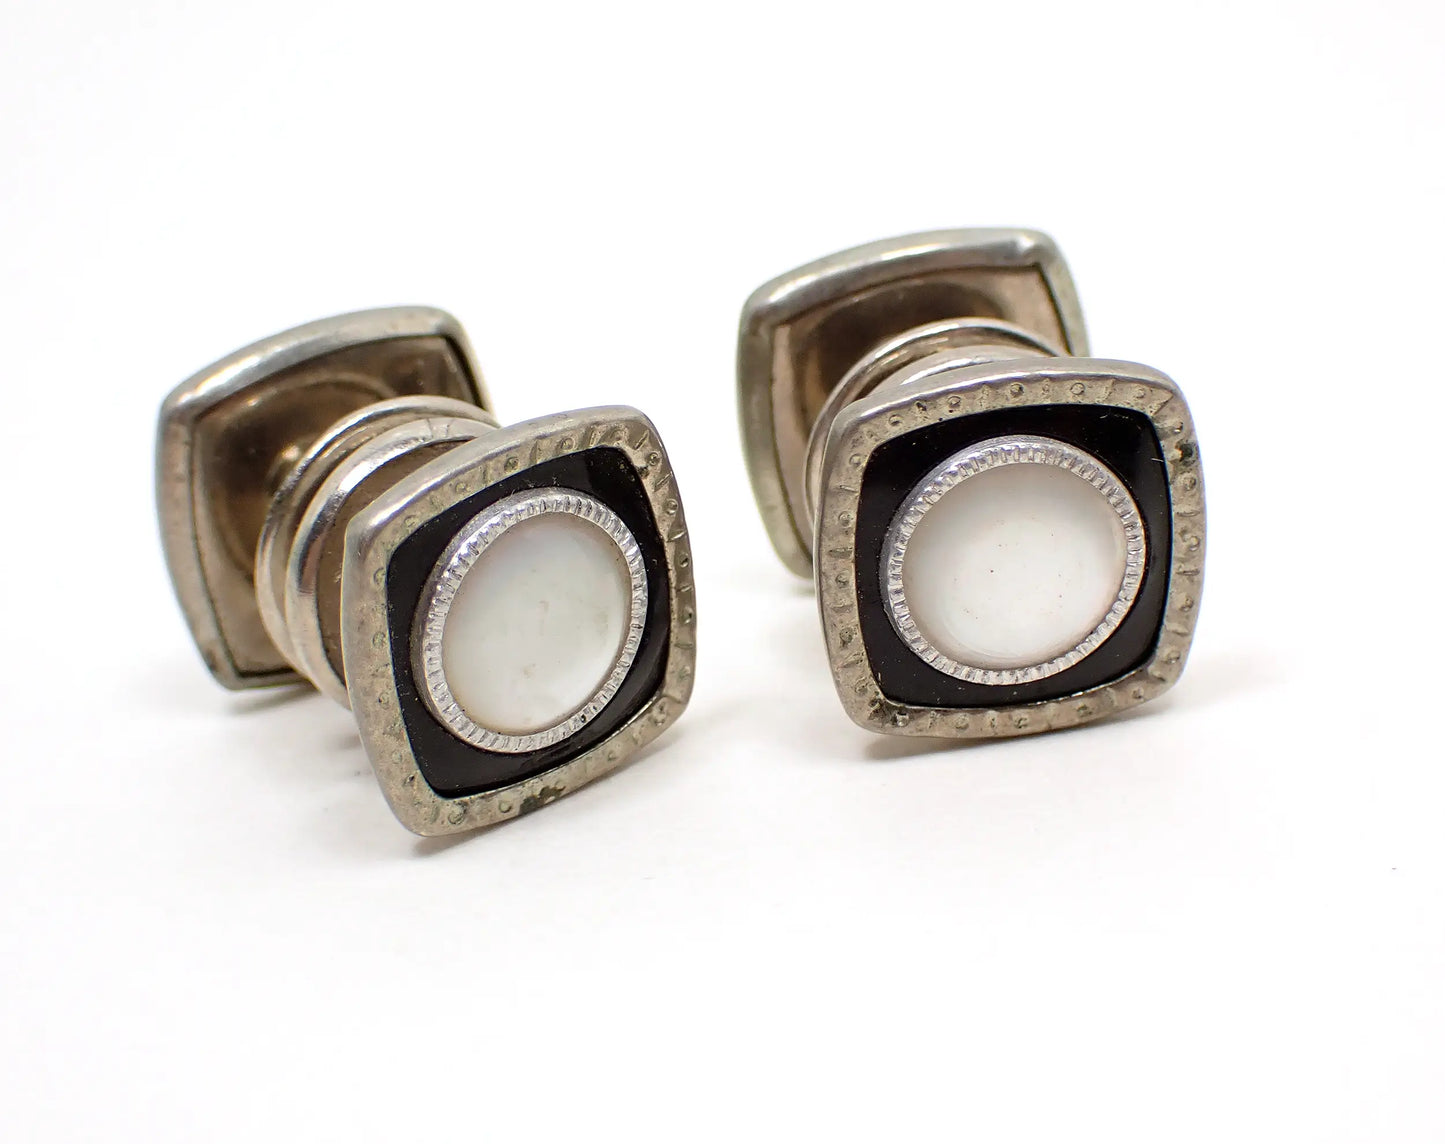 Art Deco Onyx and Mother of Pearl Vintage Cufflinks, Snap Link Cuff Links